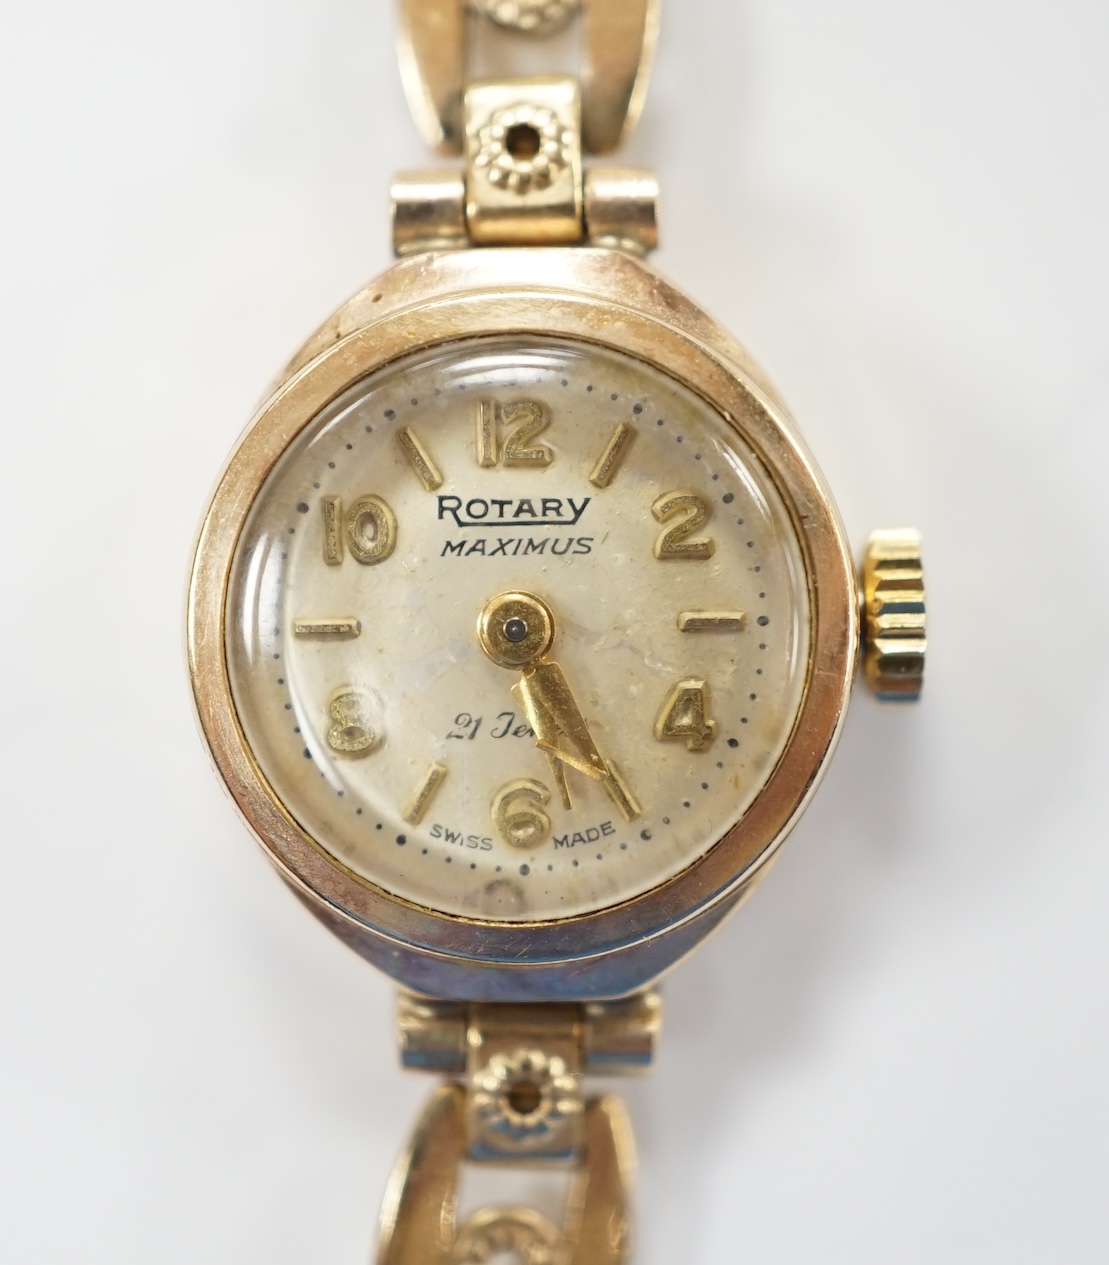 A lady's 9ct gold Rotary Maximus manual wind wrist watch, on a rolled gold bracelet. Fair condition.